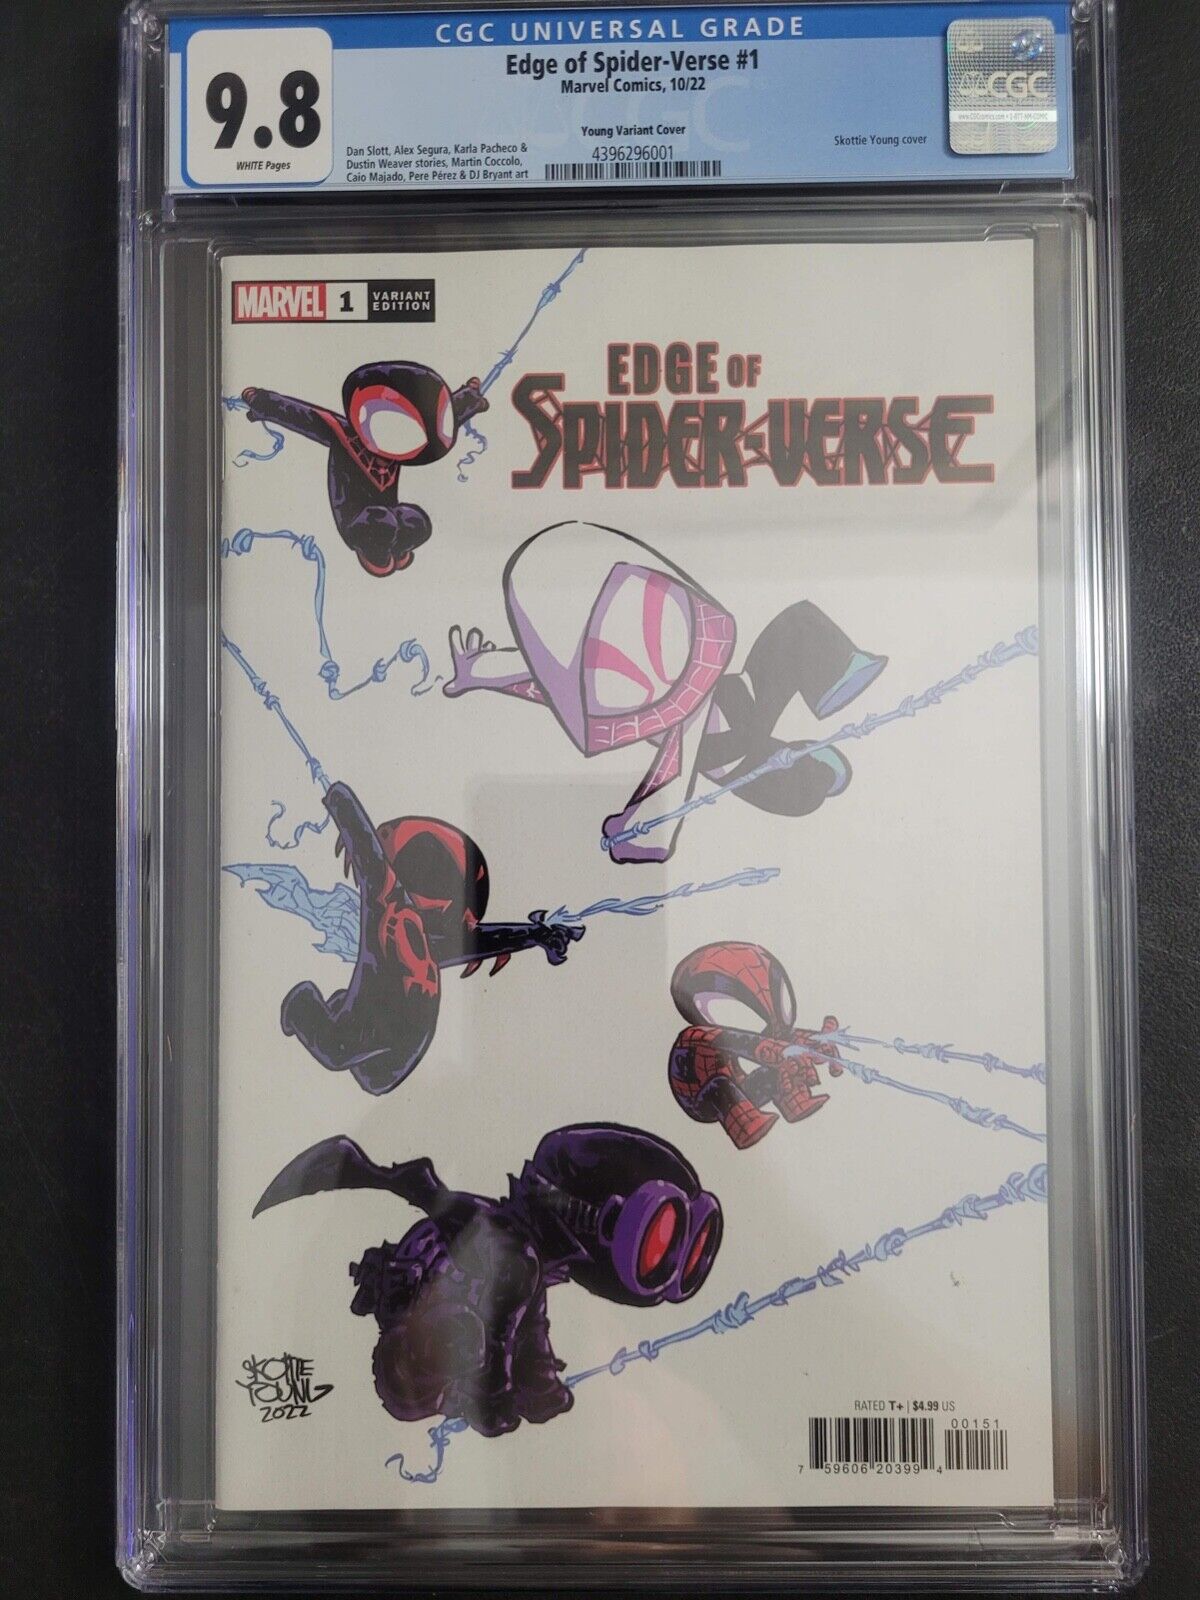 EDGE OF SPIDER-VERSE #1 CGC 9.8 GRADED 2022 SKOTTIE YOUNG VARIANT COVER